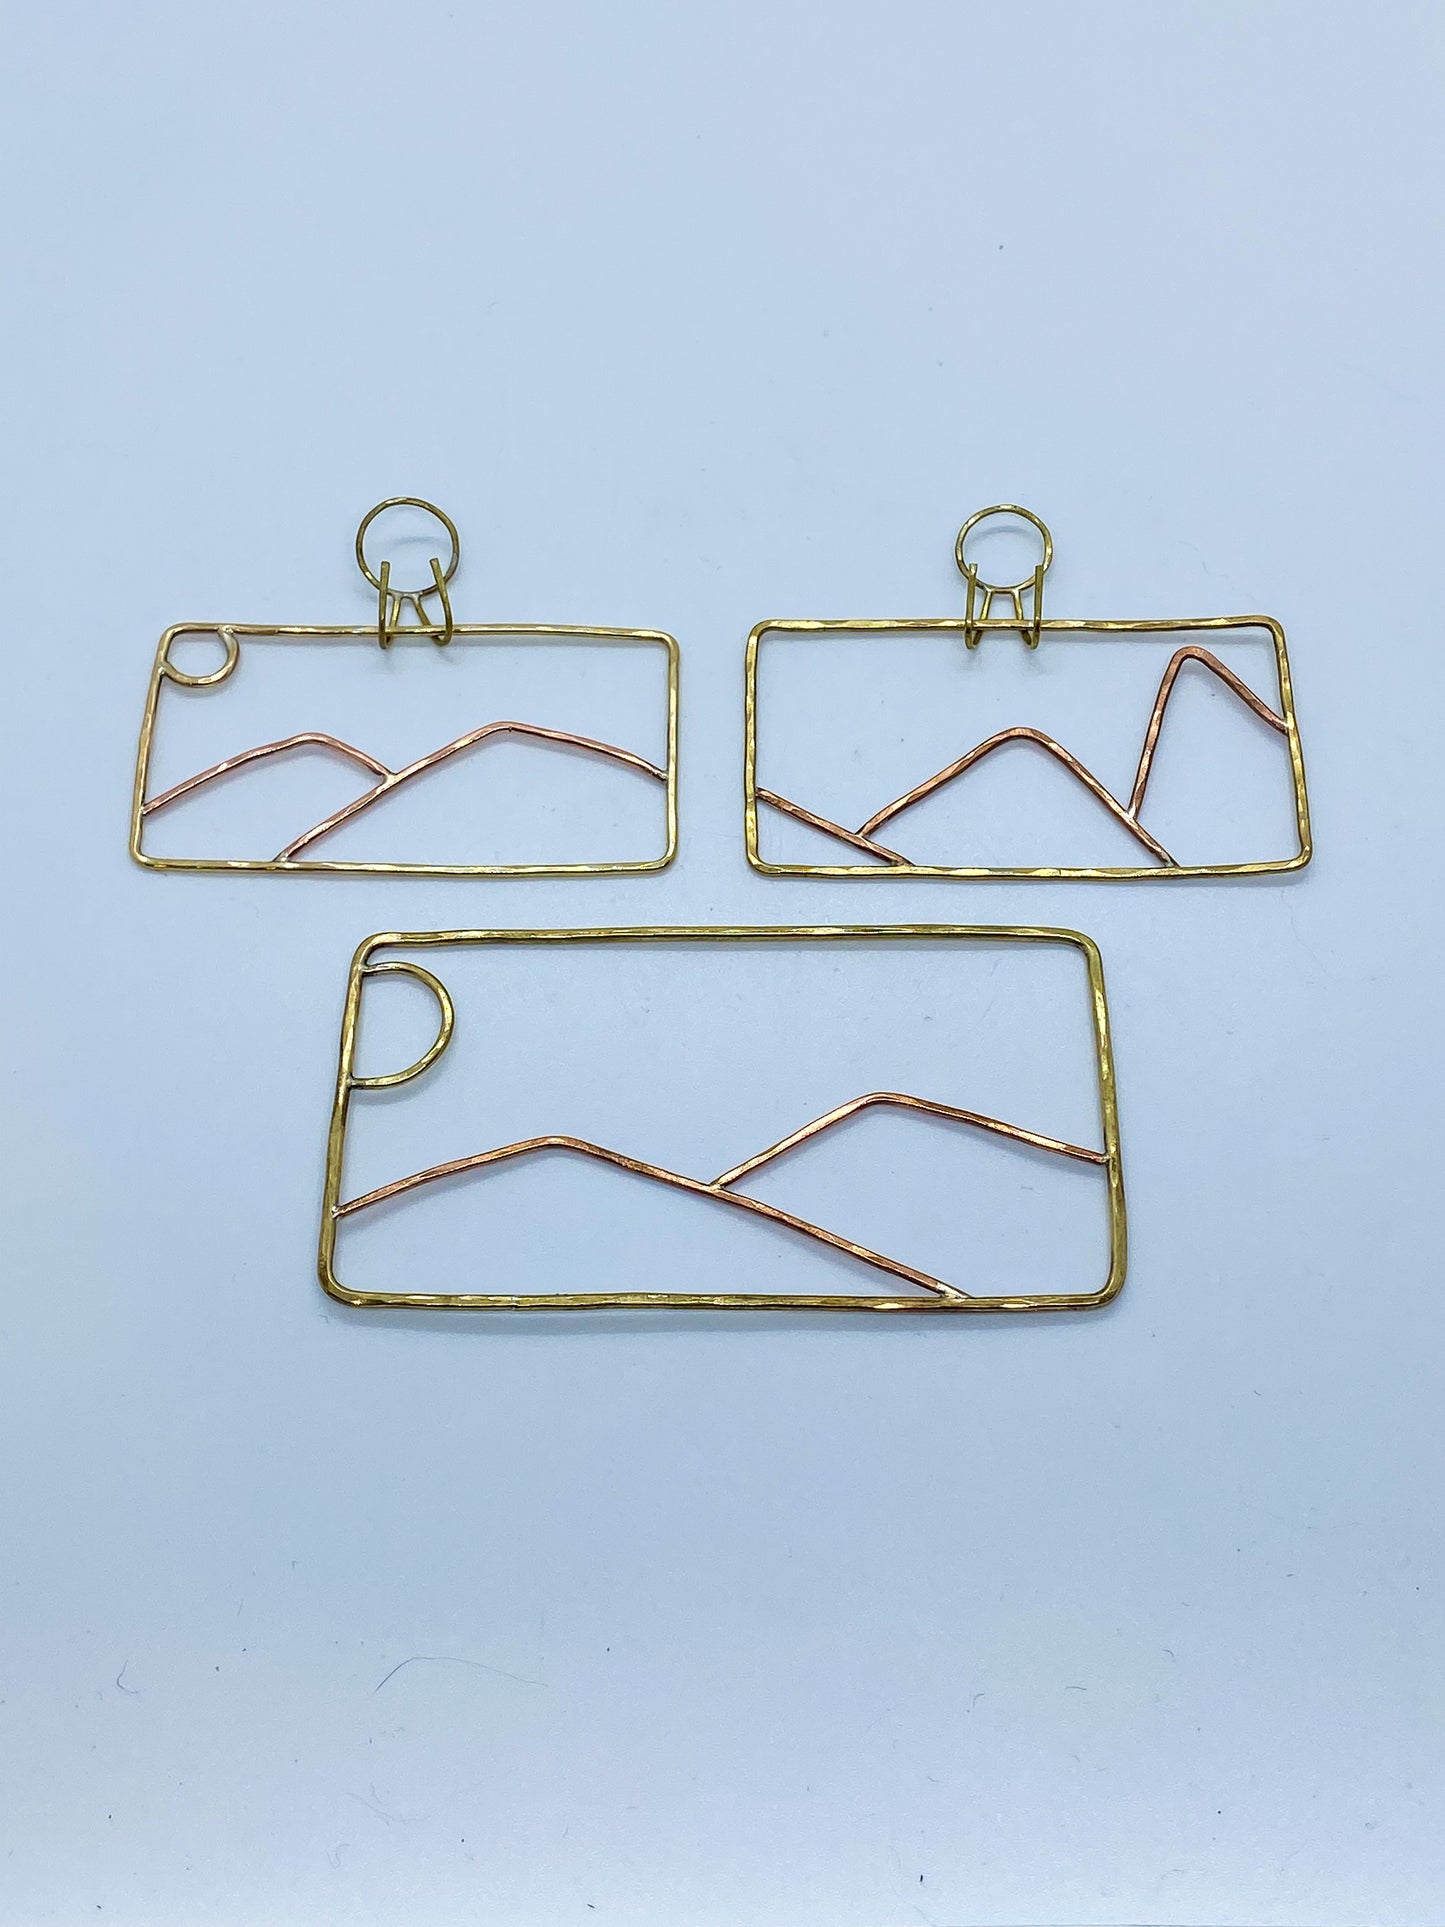 Miniature Small Mountains and Moon Landscape Wall Hanging - Brass and Copper Wall Decor Set